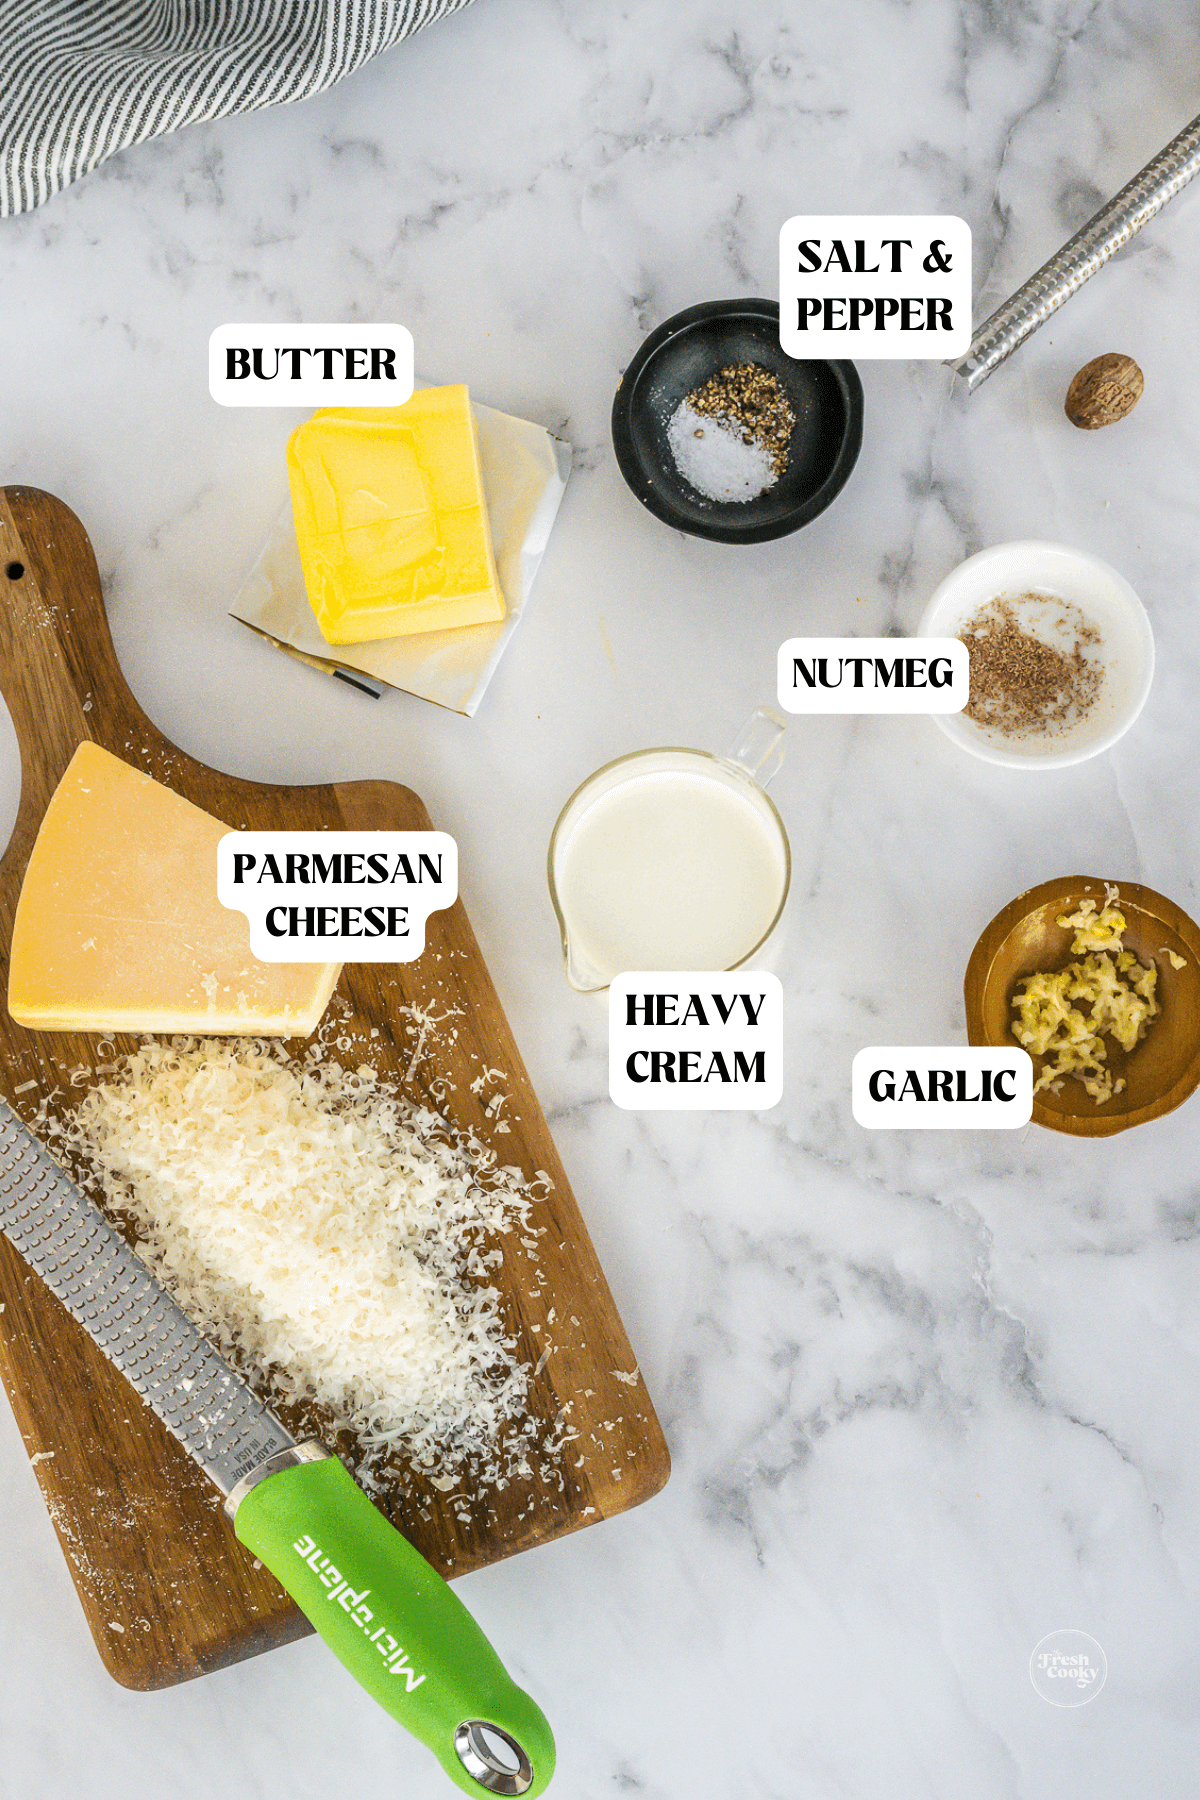 Labeled ingredients for easy alfredo sauce recipe without cream cheese.